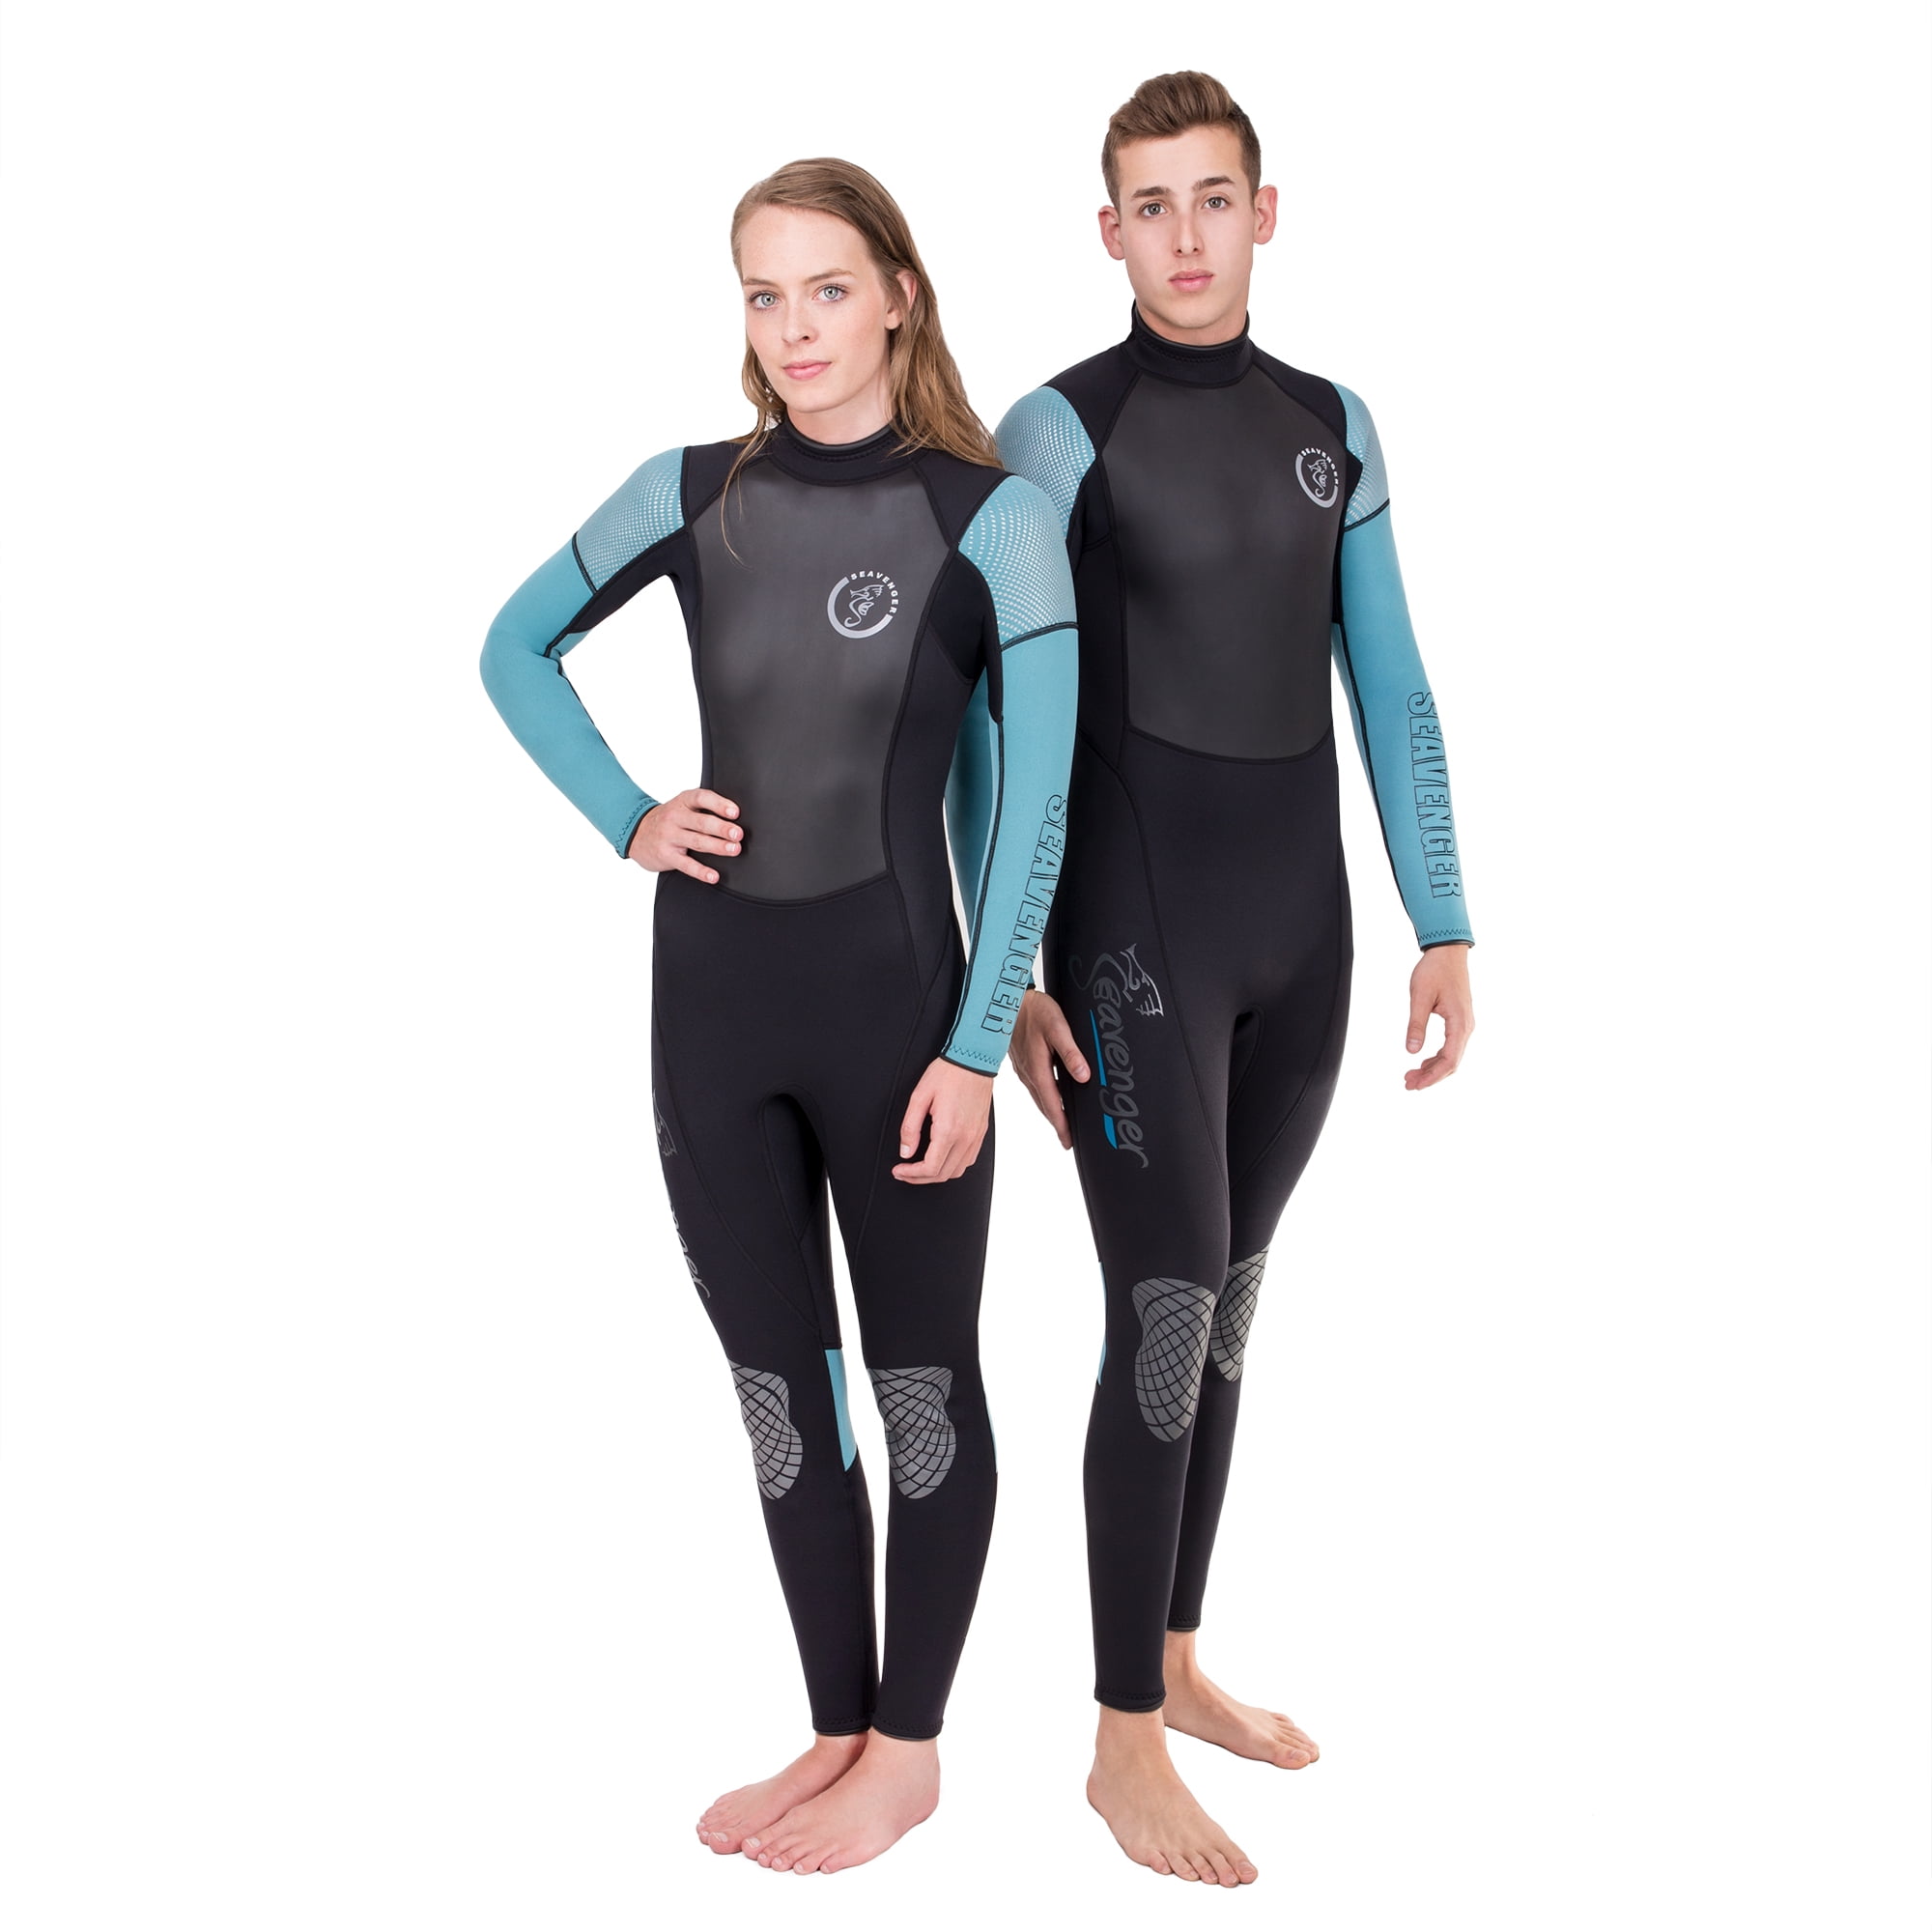 M-3XL Neoprene 3mm Mens Wetsuit Stretch Full Length Diving Sailing Surfing suit 